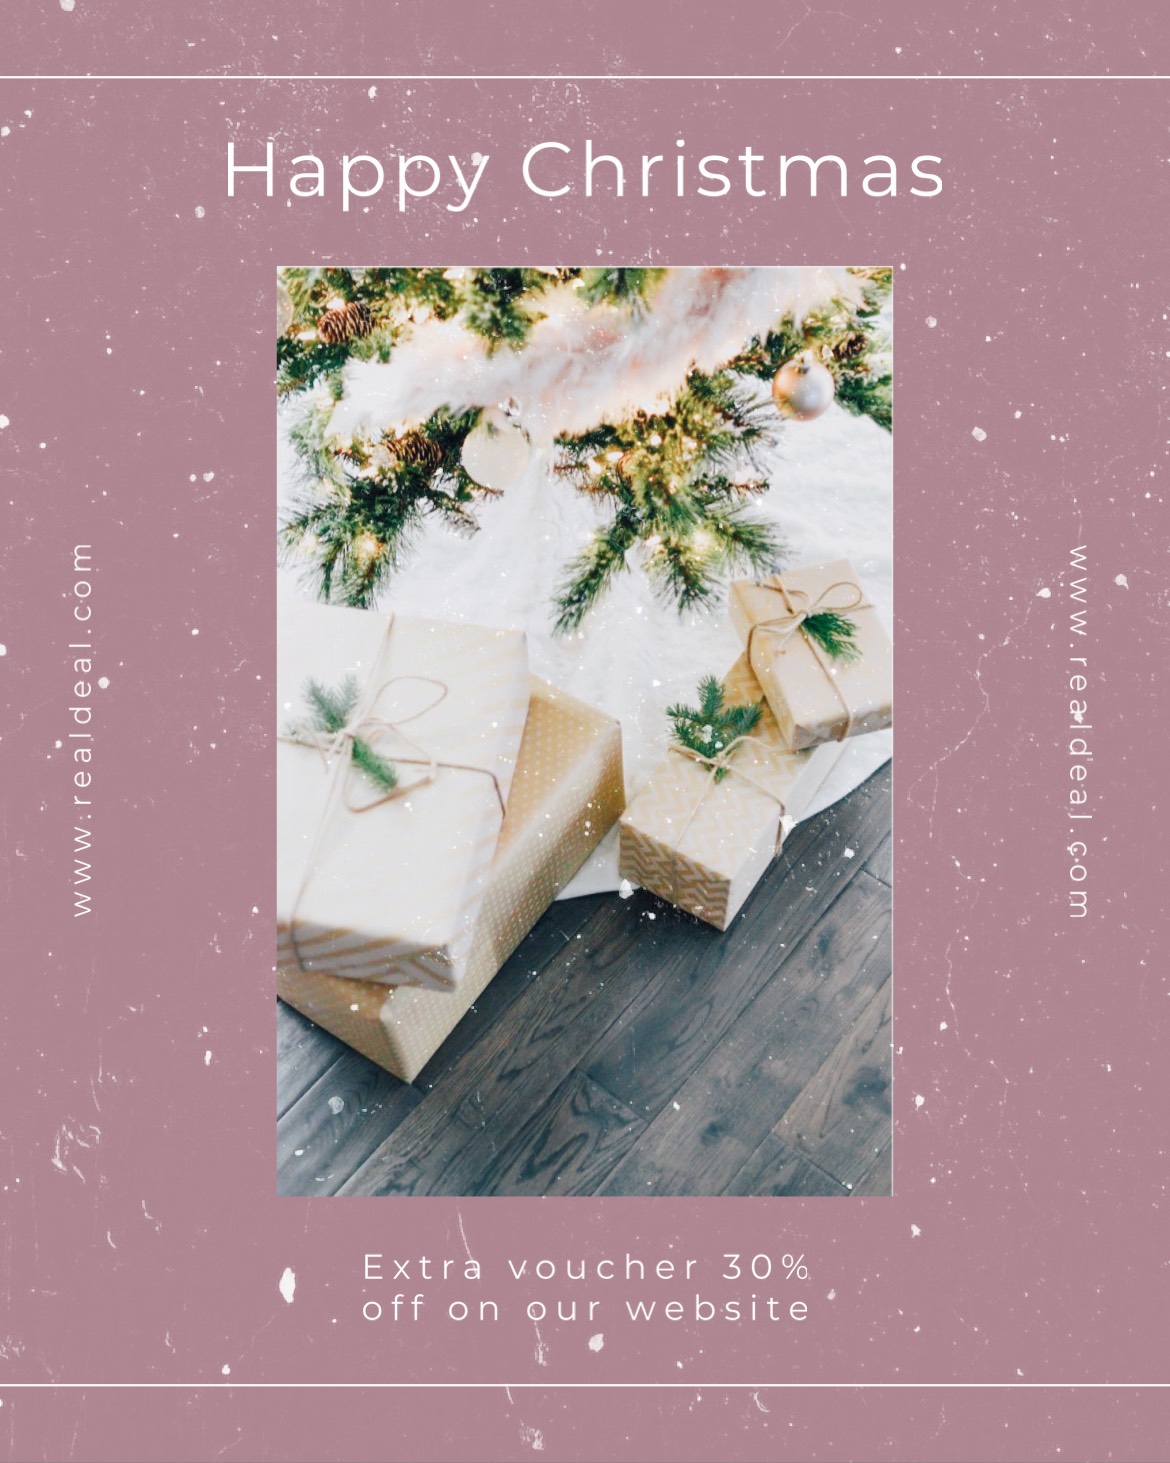 A Pink Christmas Card With Presents On It Merry Christmas Template